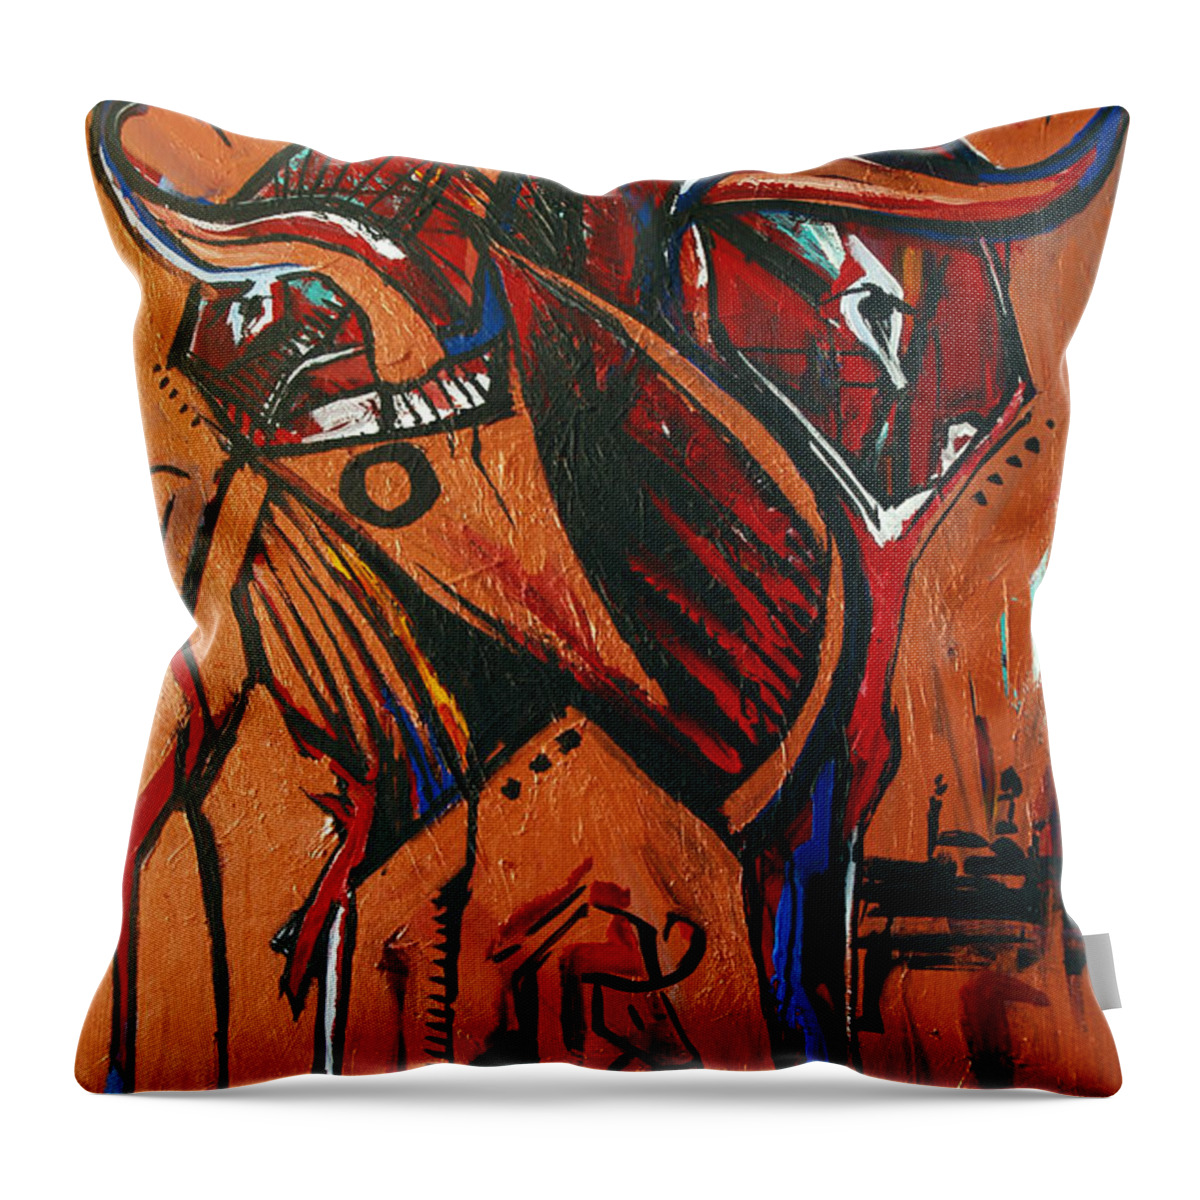  Throw Pillow featuring the painting Vitality by John Gholson